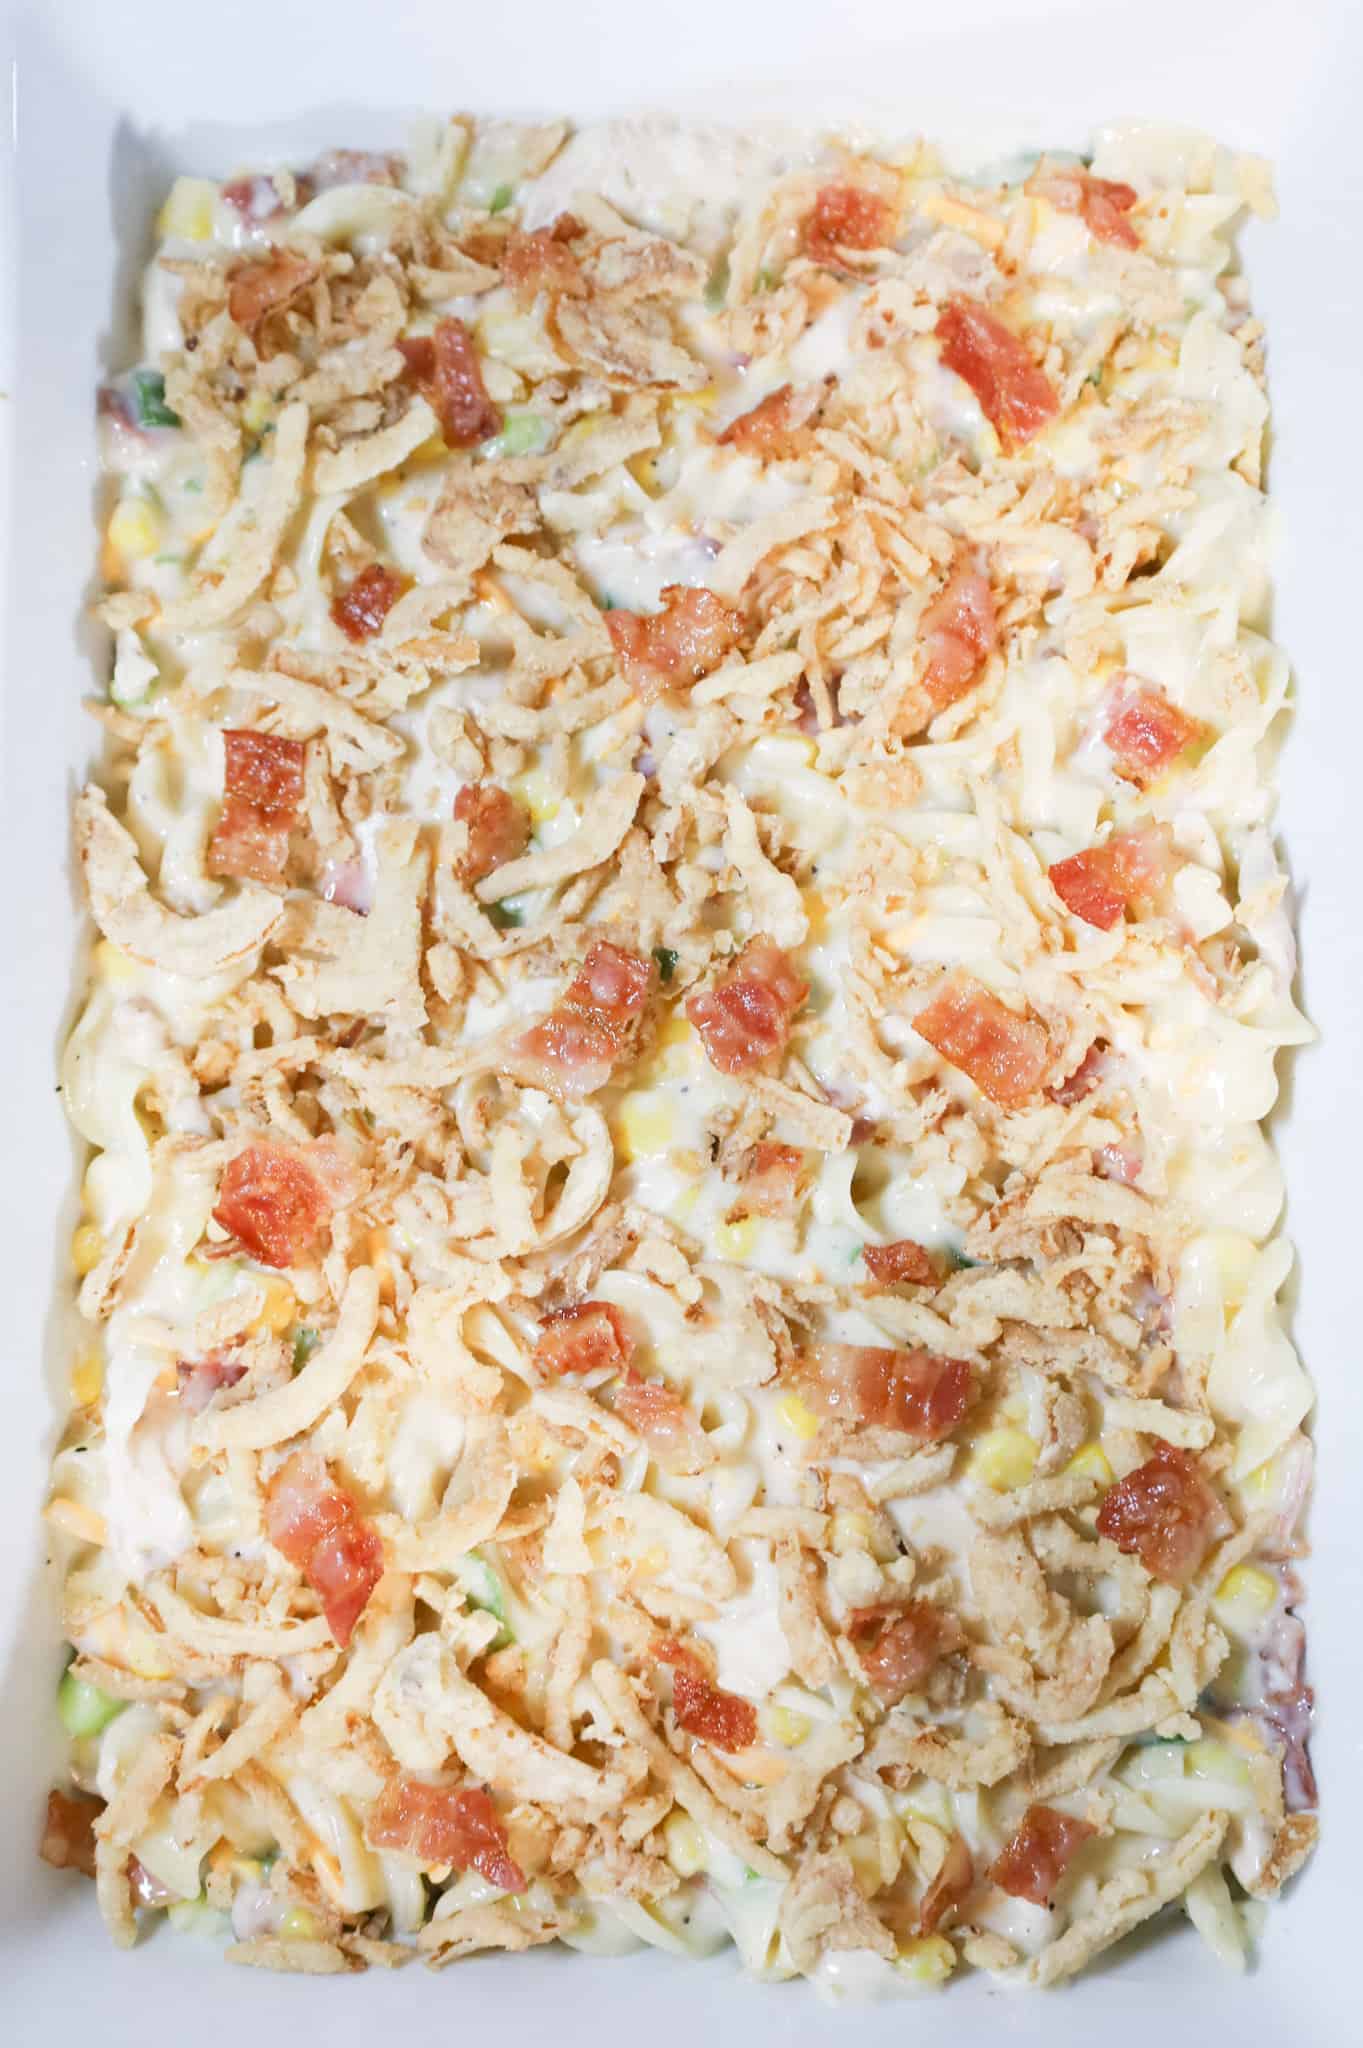 chopped bacon and crispy French's fried onions on top of creamy chicken casserole